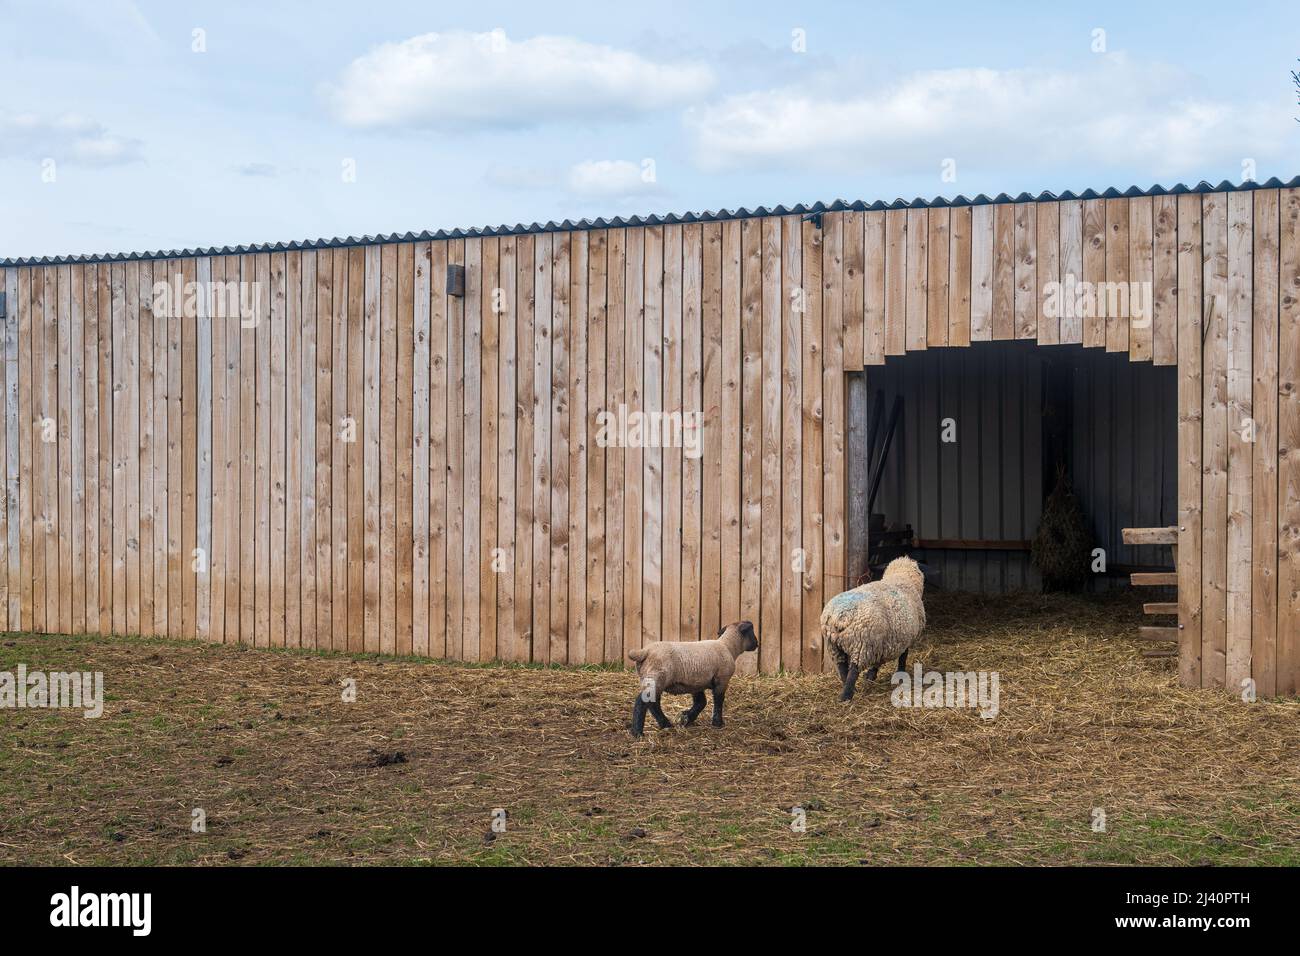 A ewe sheep leads a lamb into the barn for shelter in a farmers field. Agricultural lambing season of Spring. West Yorkshire, UK. Stock Photo